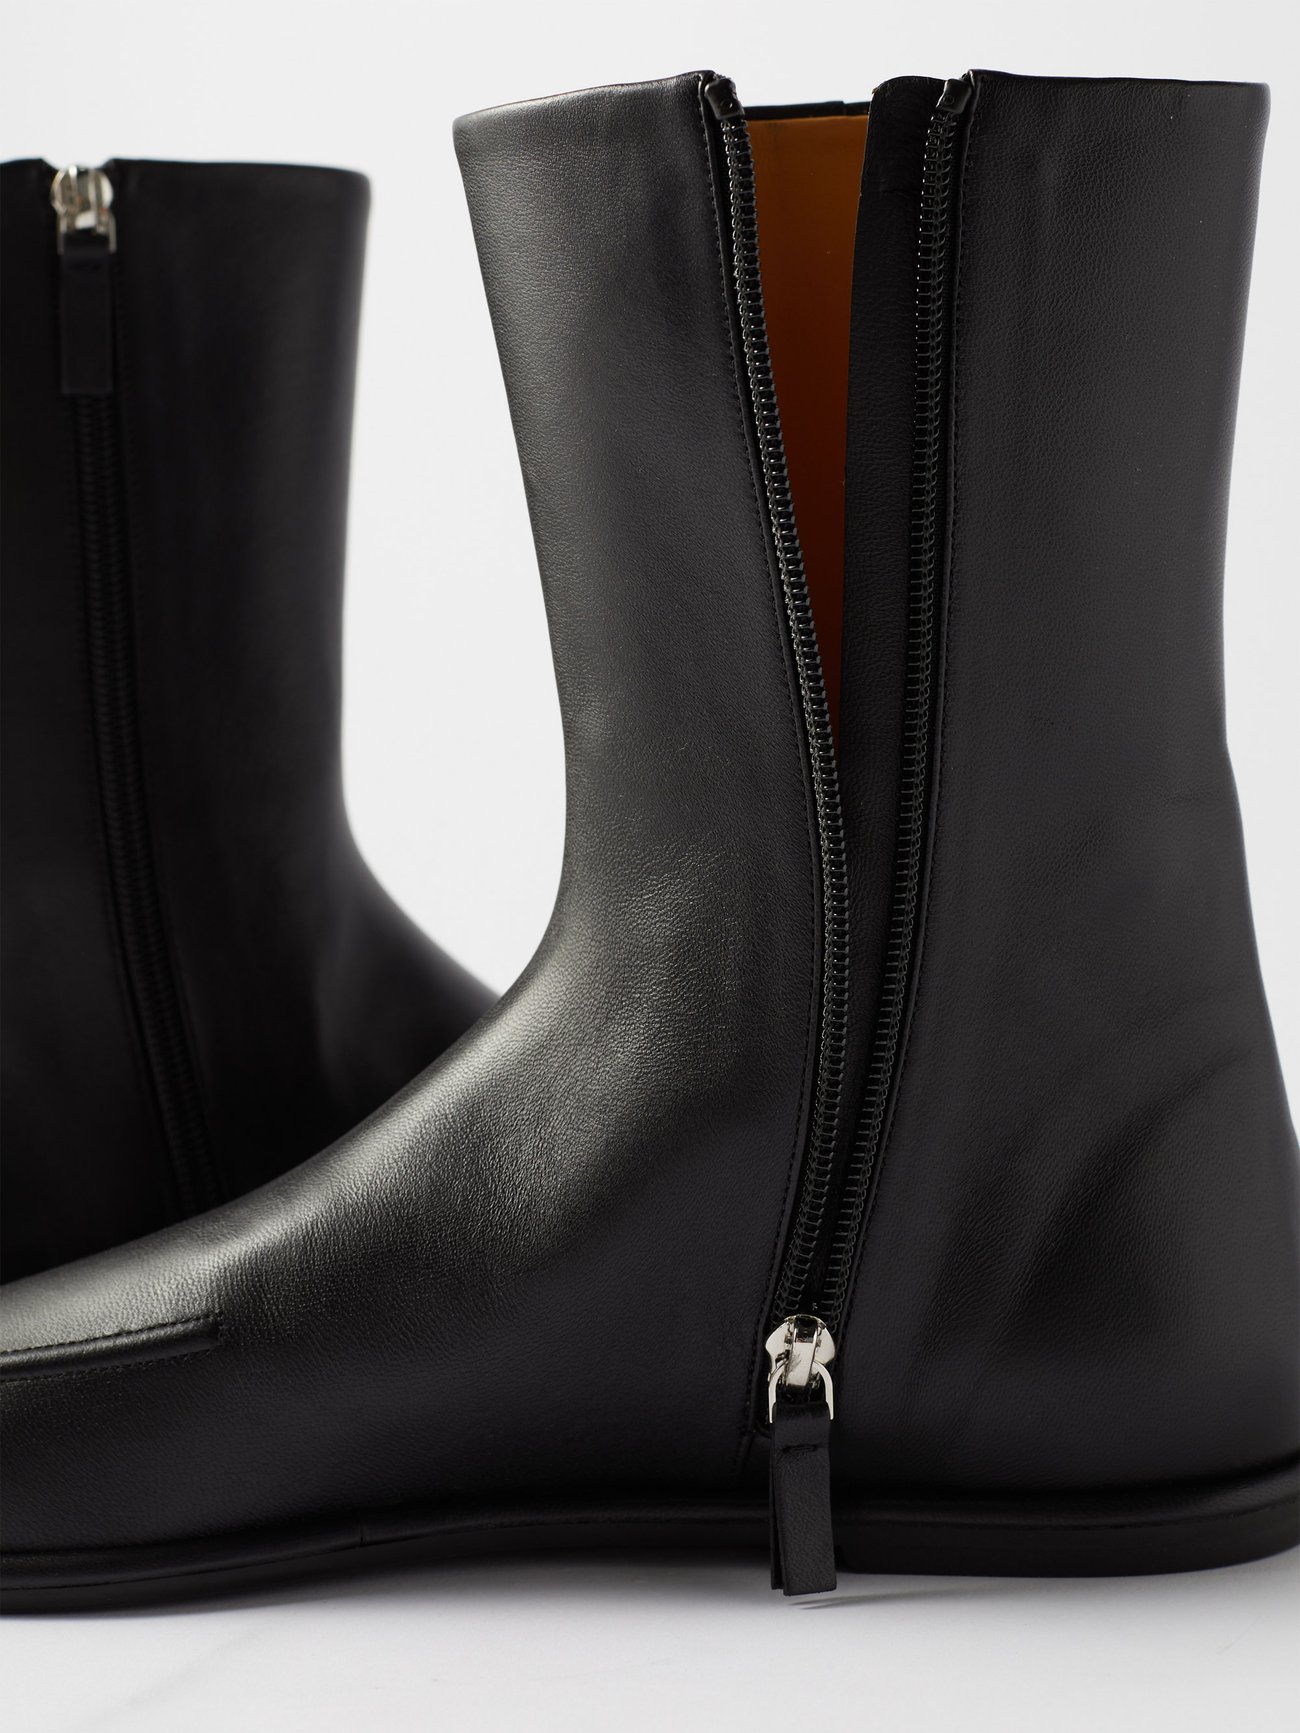 Black Canal leather ankle boots | The Row | MATCHES UK